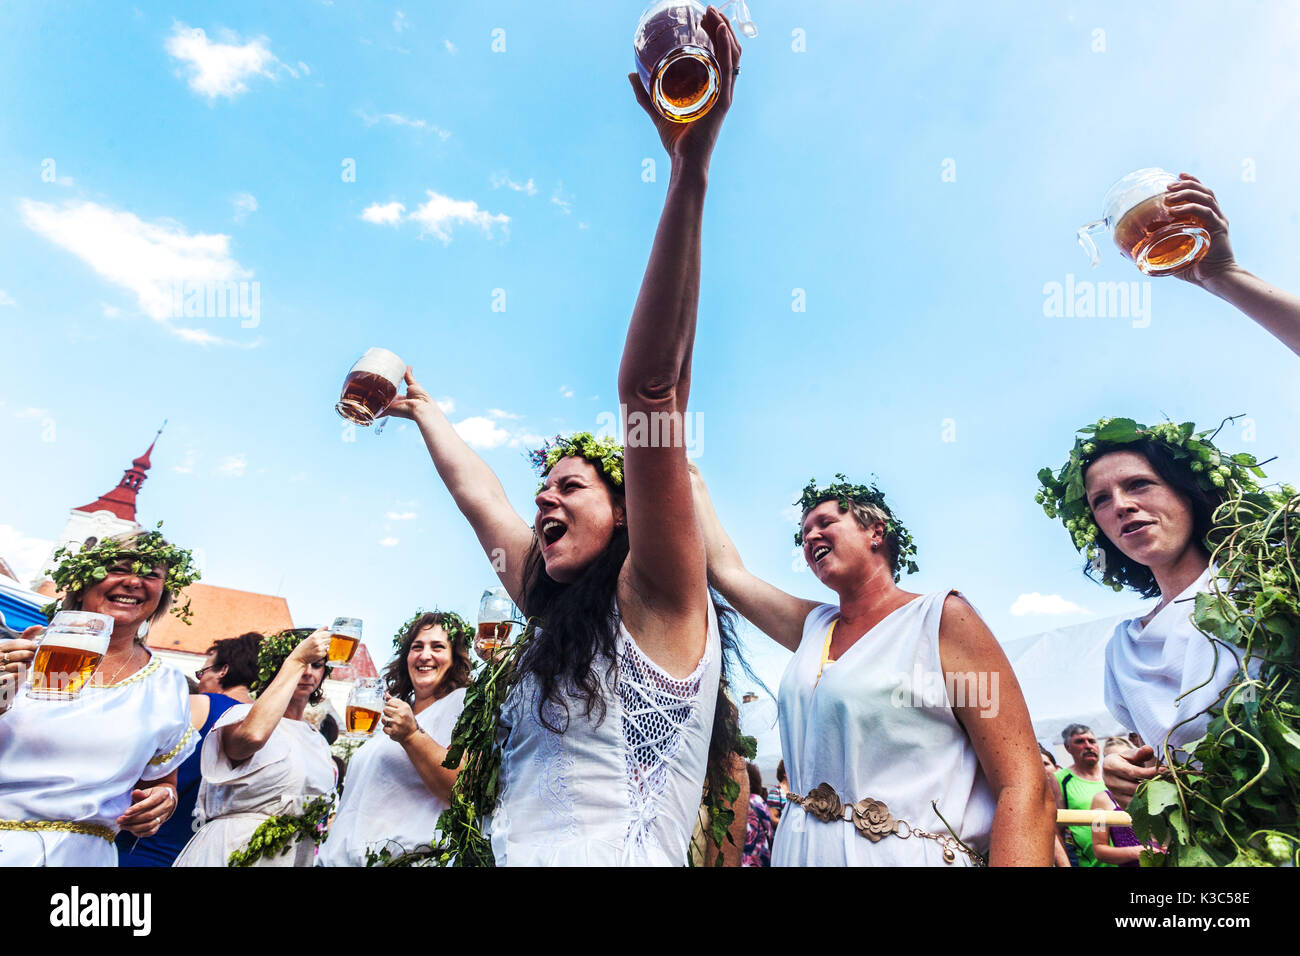 Gods and the goddess of hops visited and opened the Czech beer festival, Jevisovice, Czech Republic enjoying beers Stock Photo